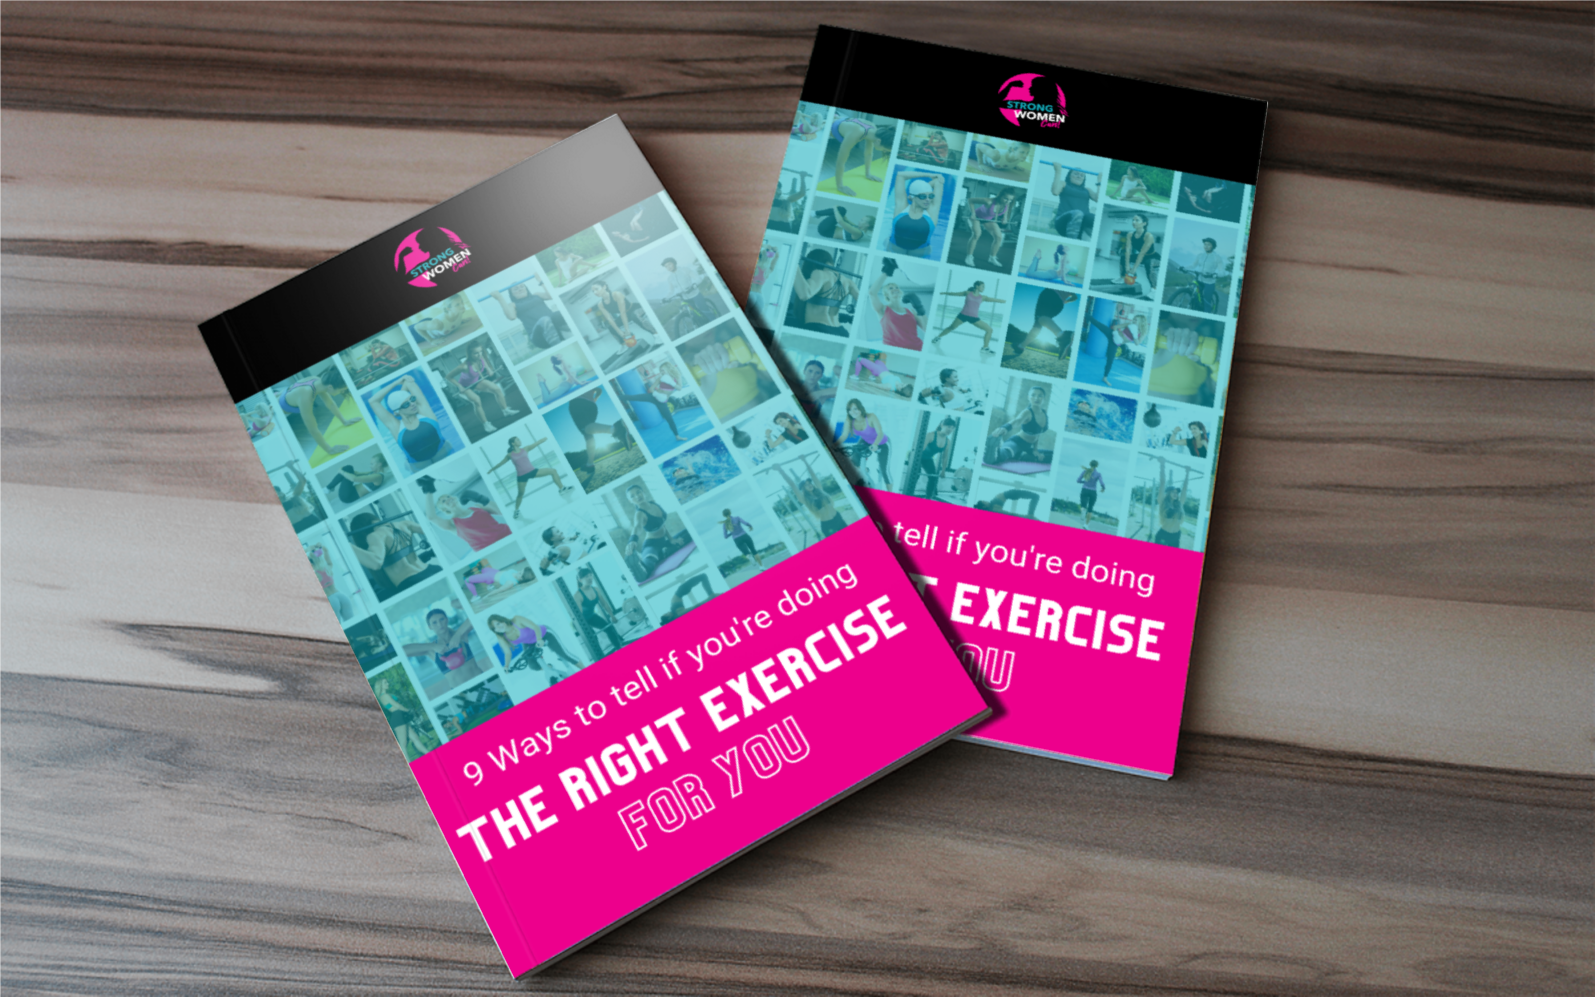 Download your free copy of 9 Ways to tell if you're doing the right exercise for you